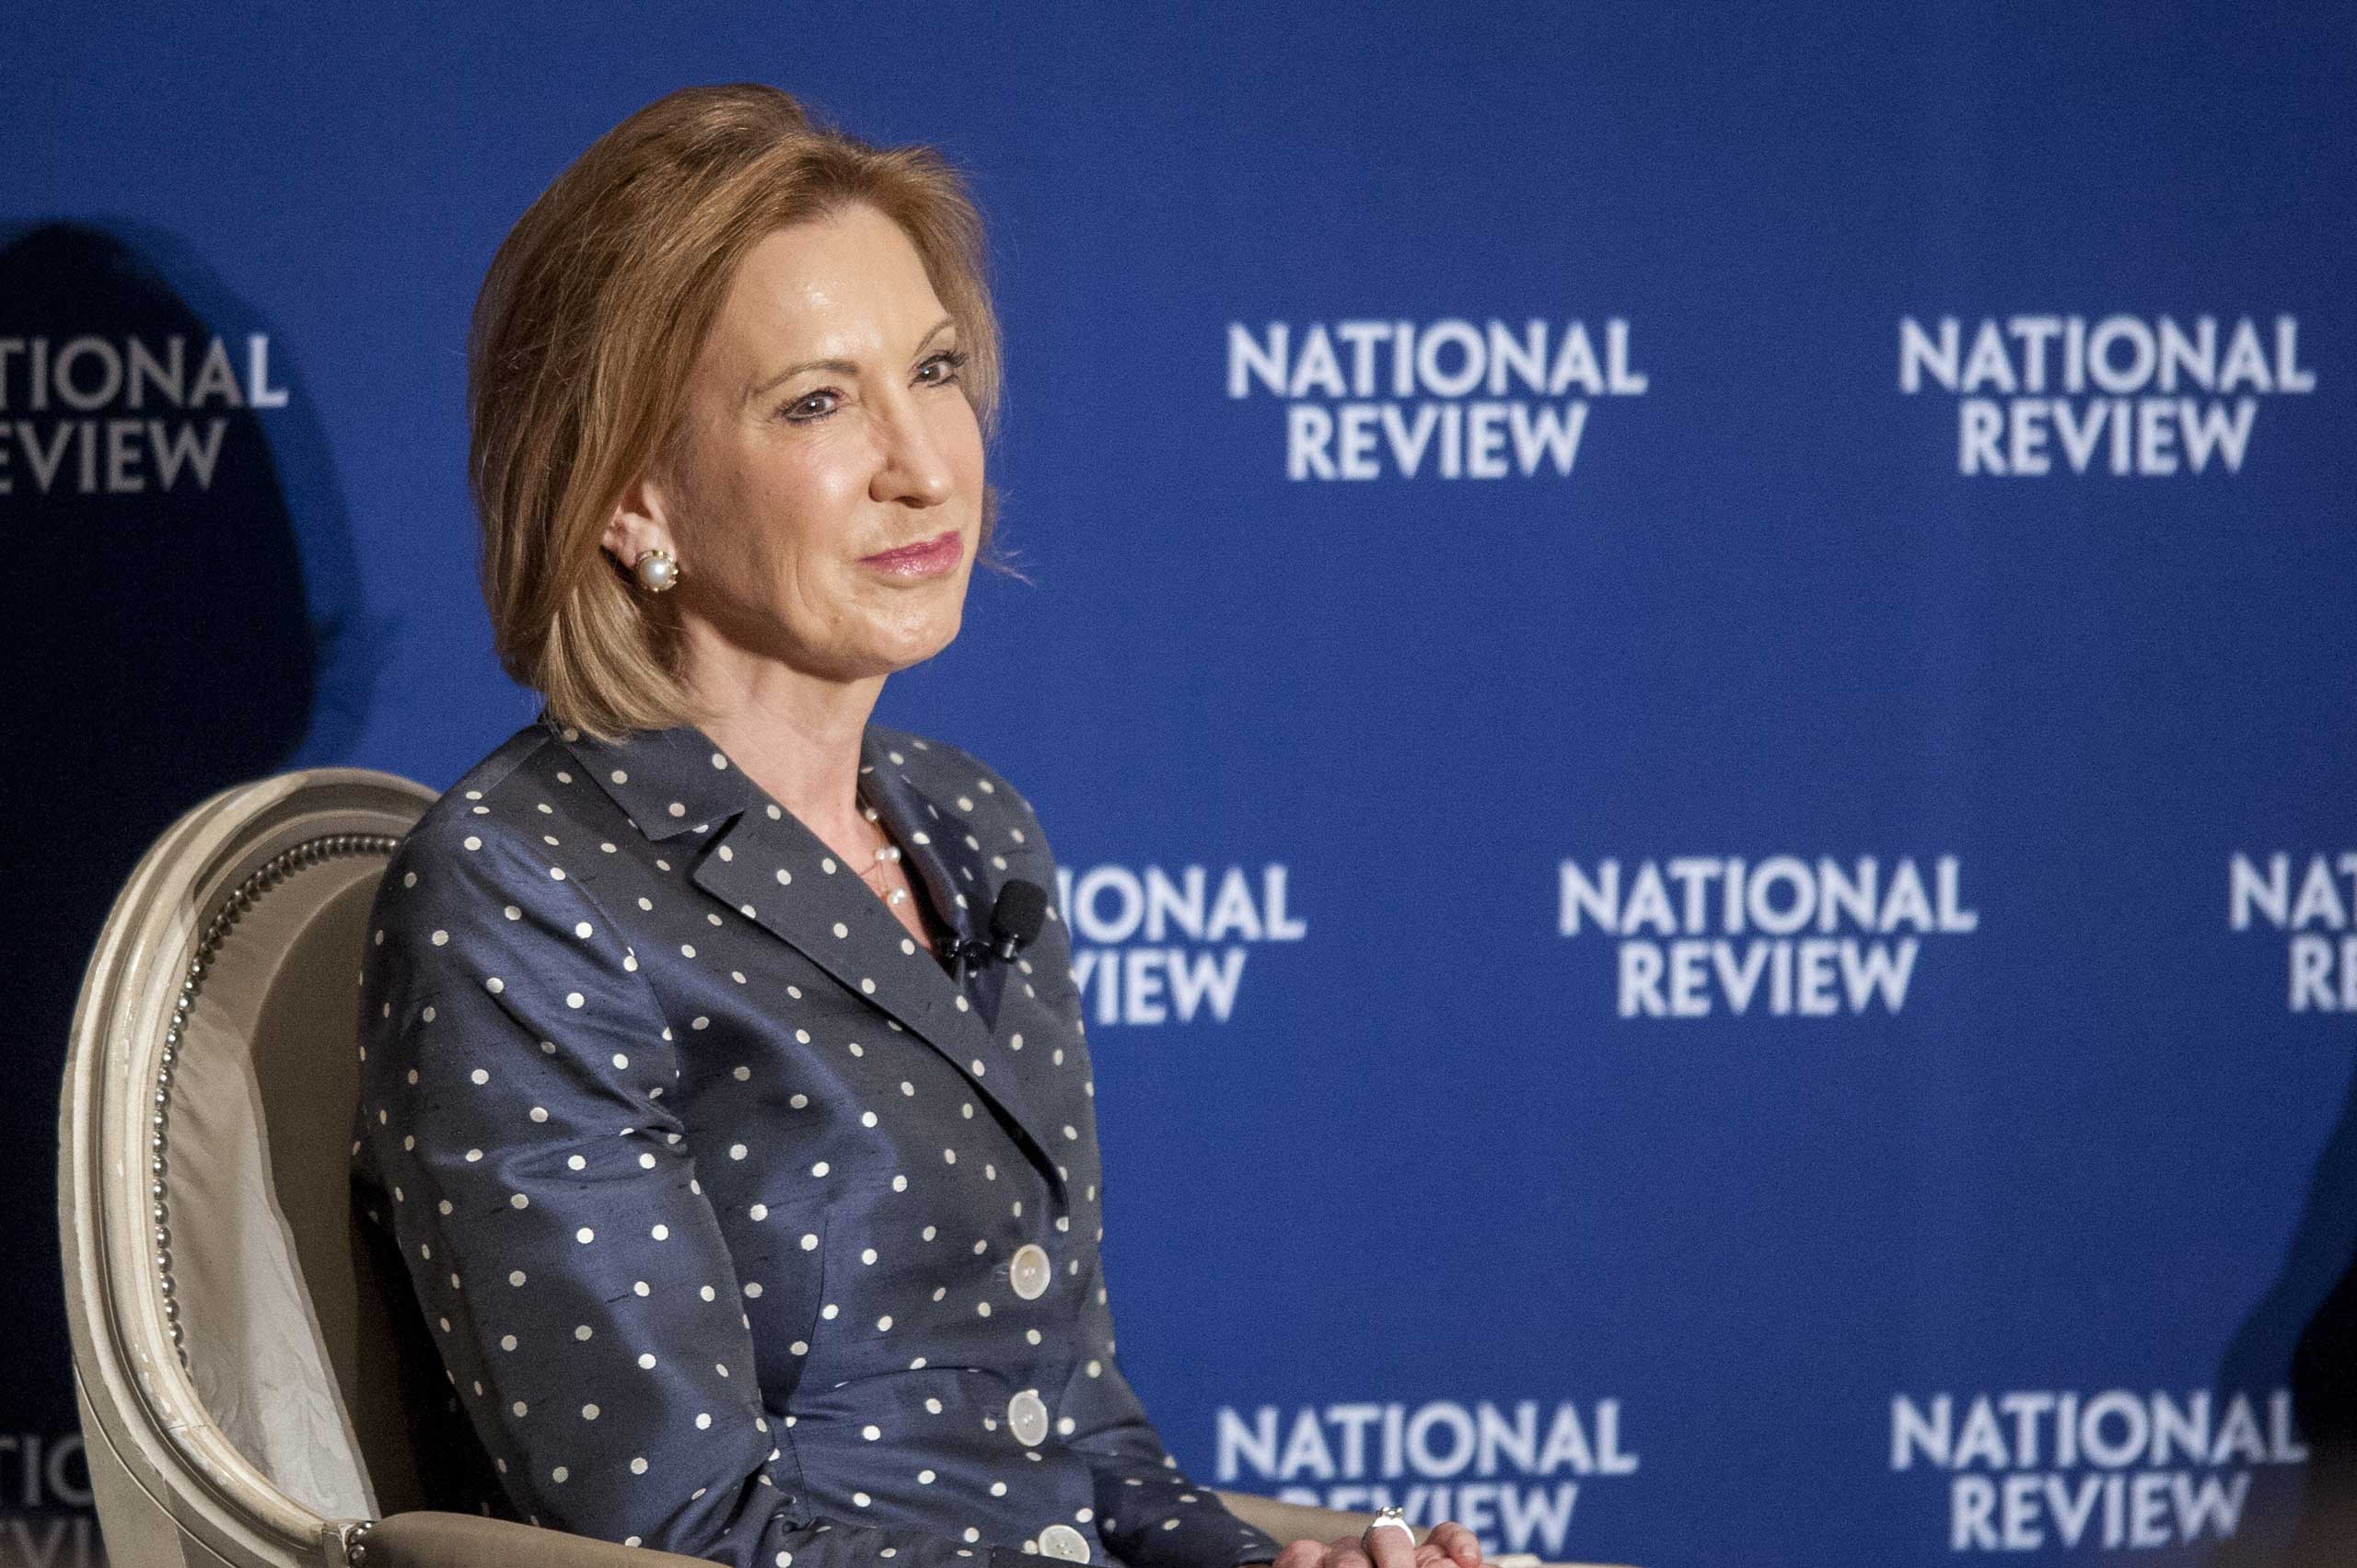 Carly Fiorina participates in a discussion during the 2015 National Review Ideas Summit held at the Willard InterContinental Hotel in Washington on May 2, 2015. (Pete Marovich—Corbis)